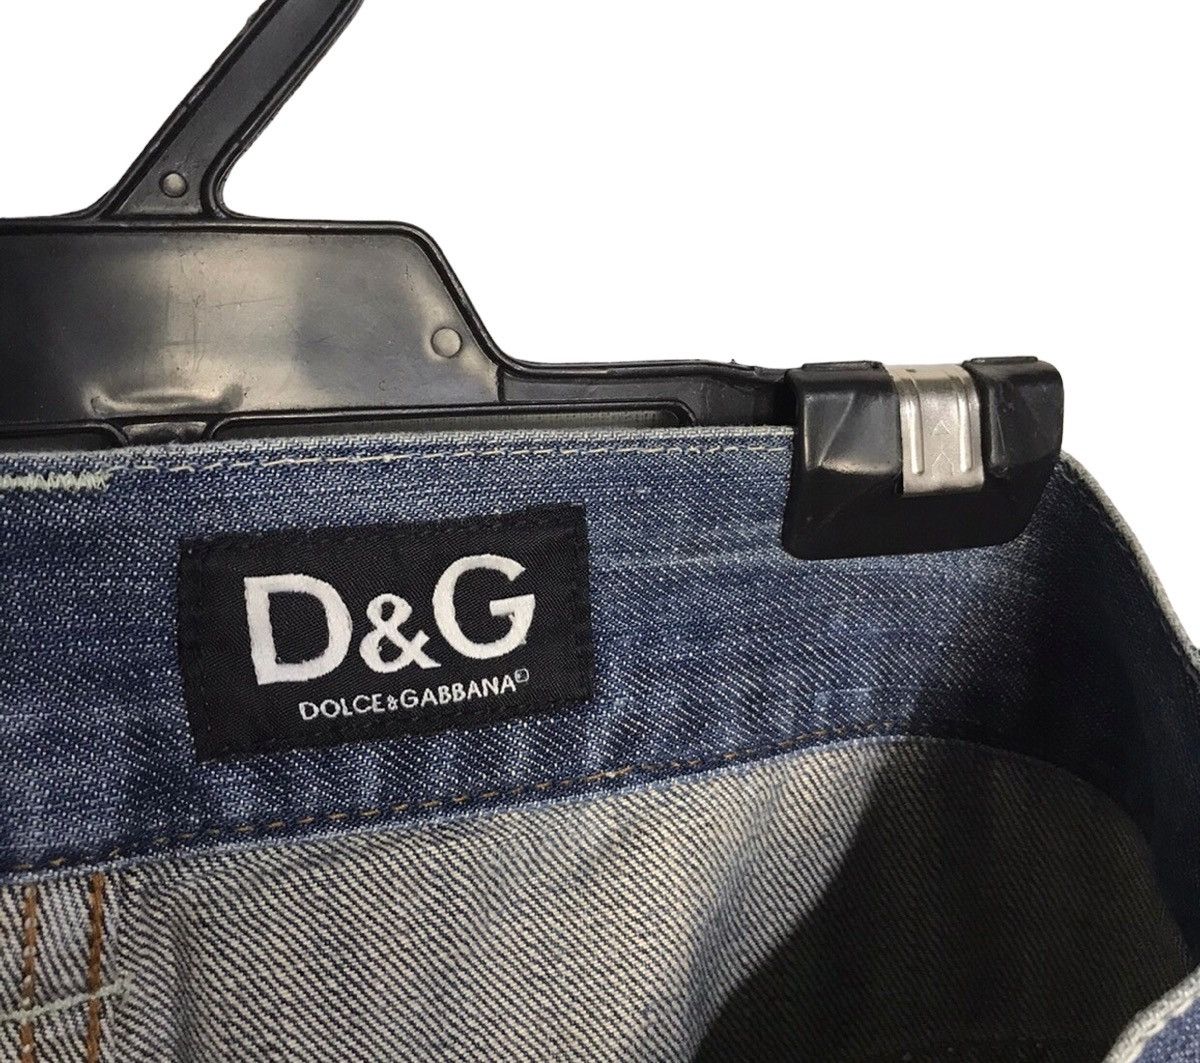 D&G denim pants made in italy - 5